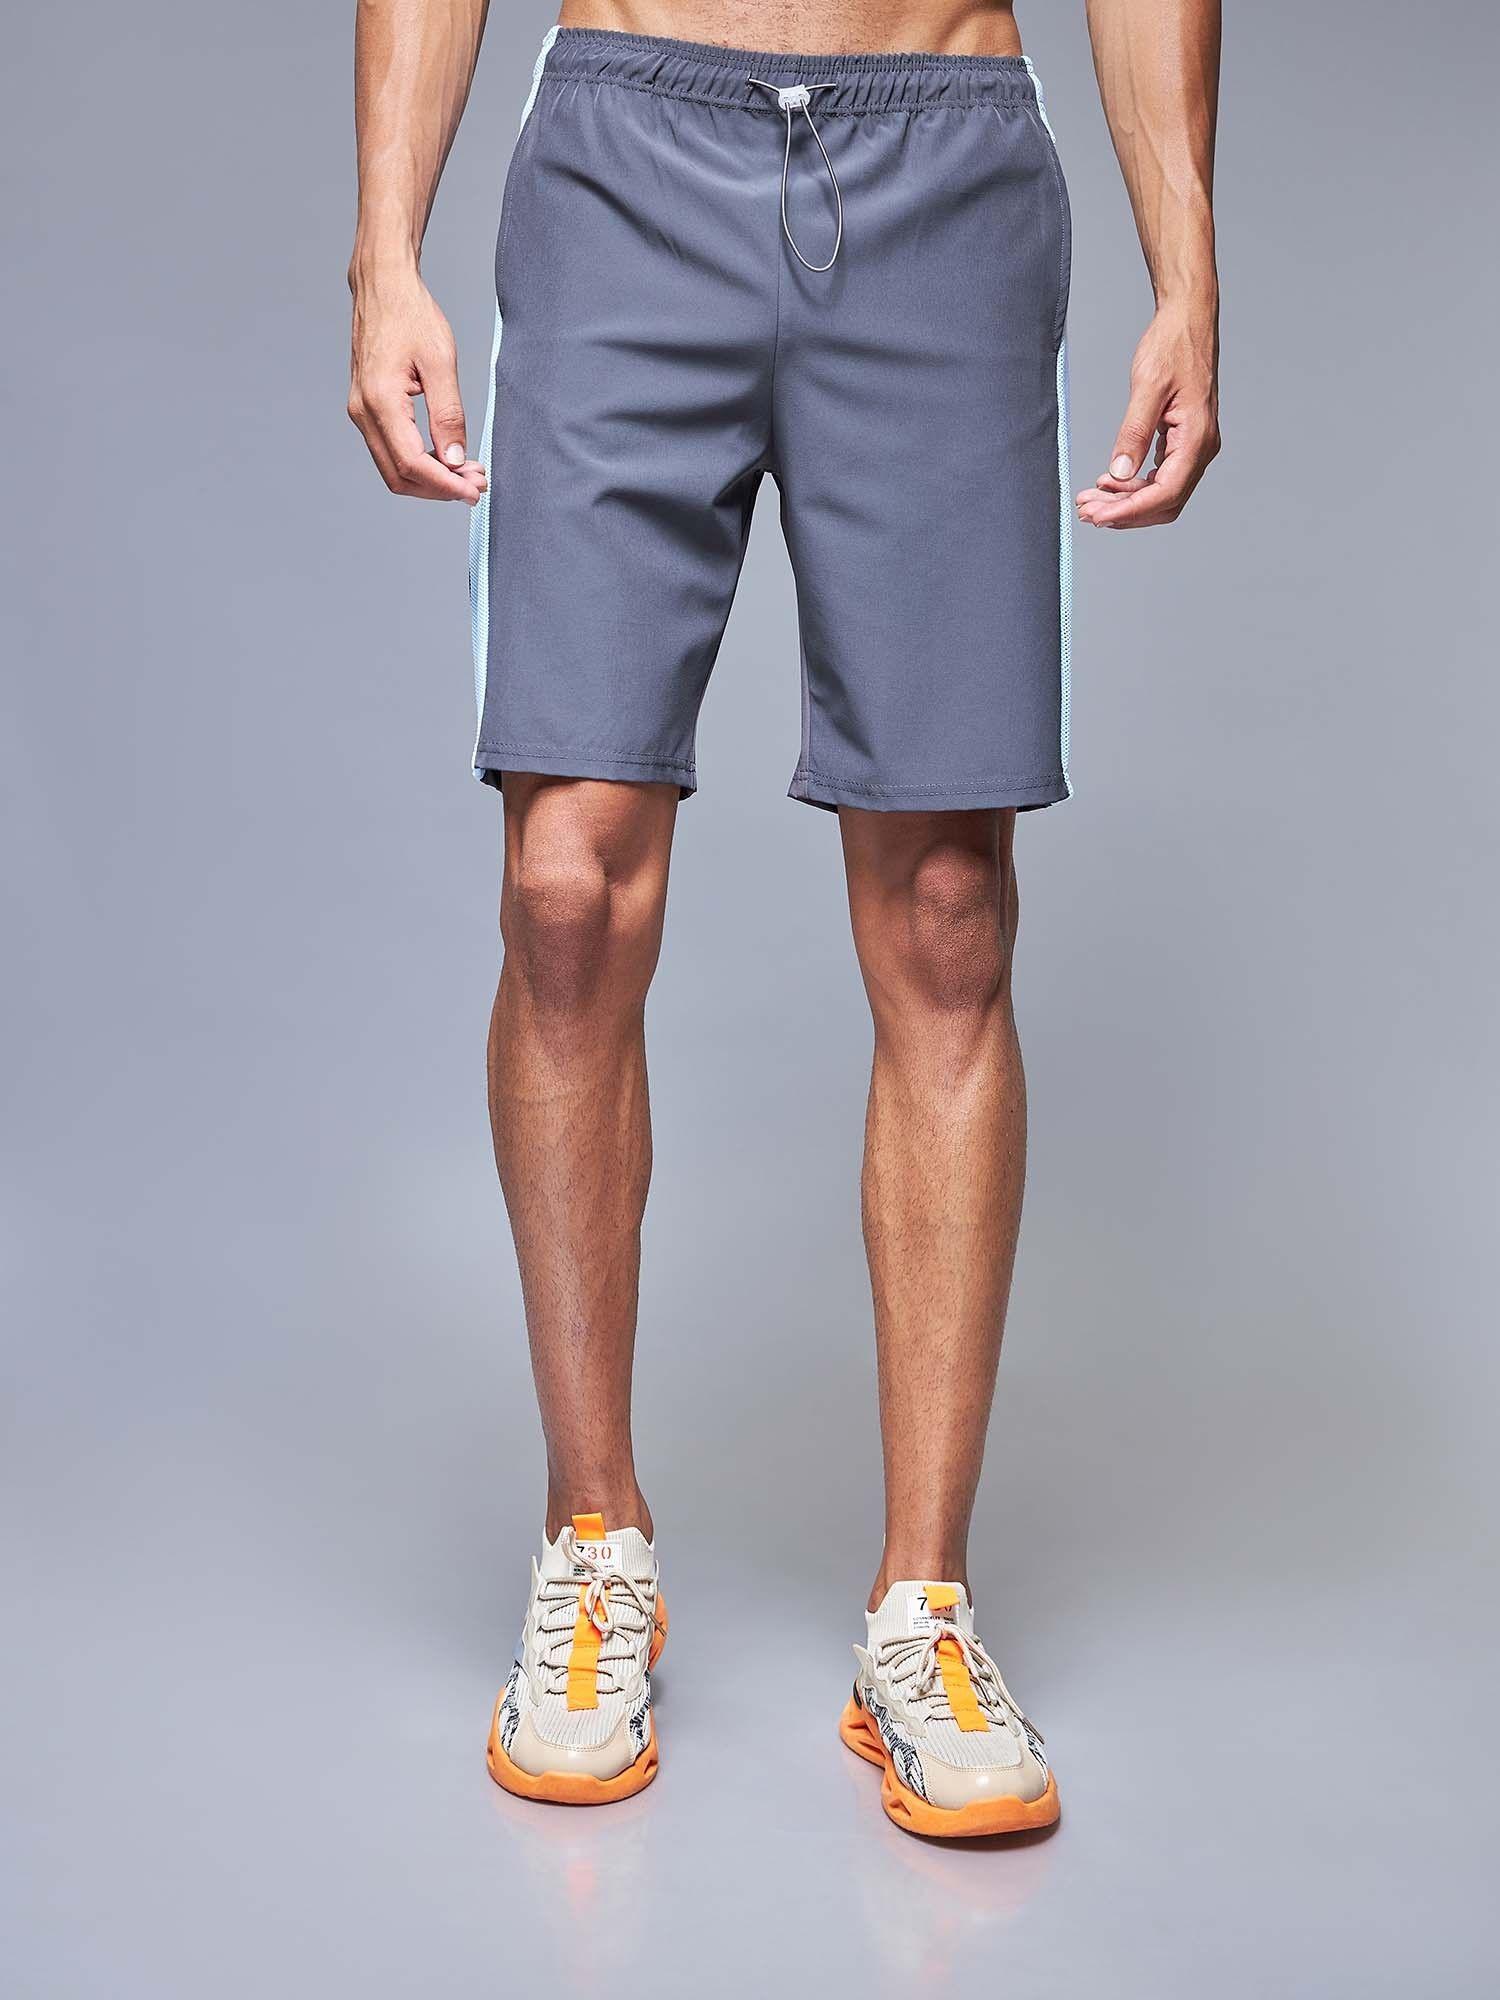 light-blue-chase-rapid-dry-shorts